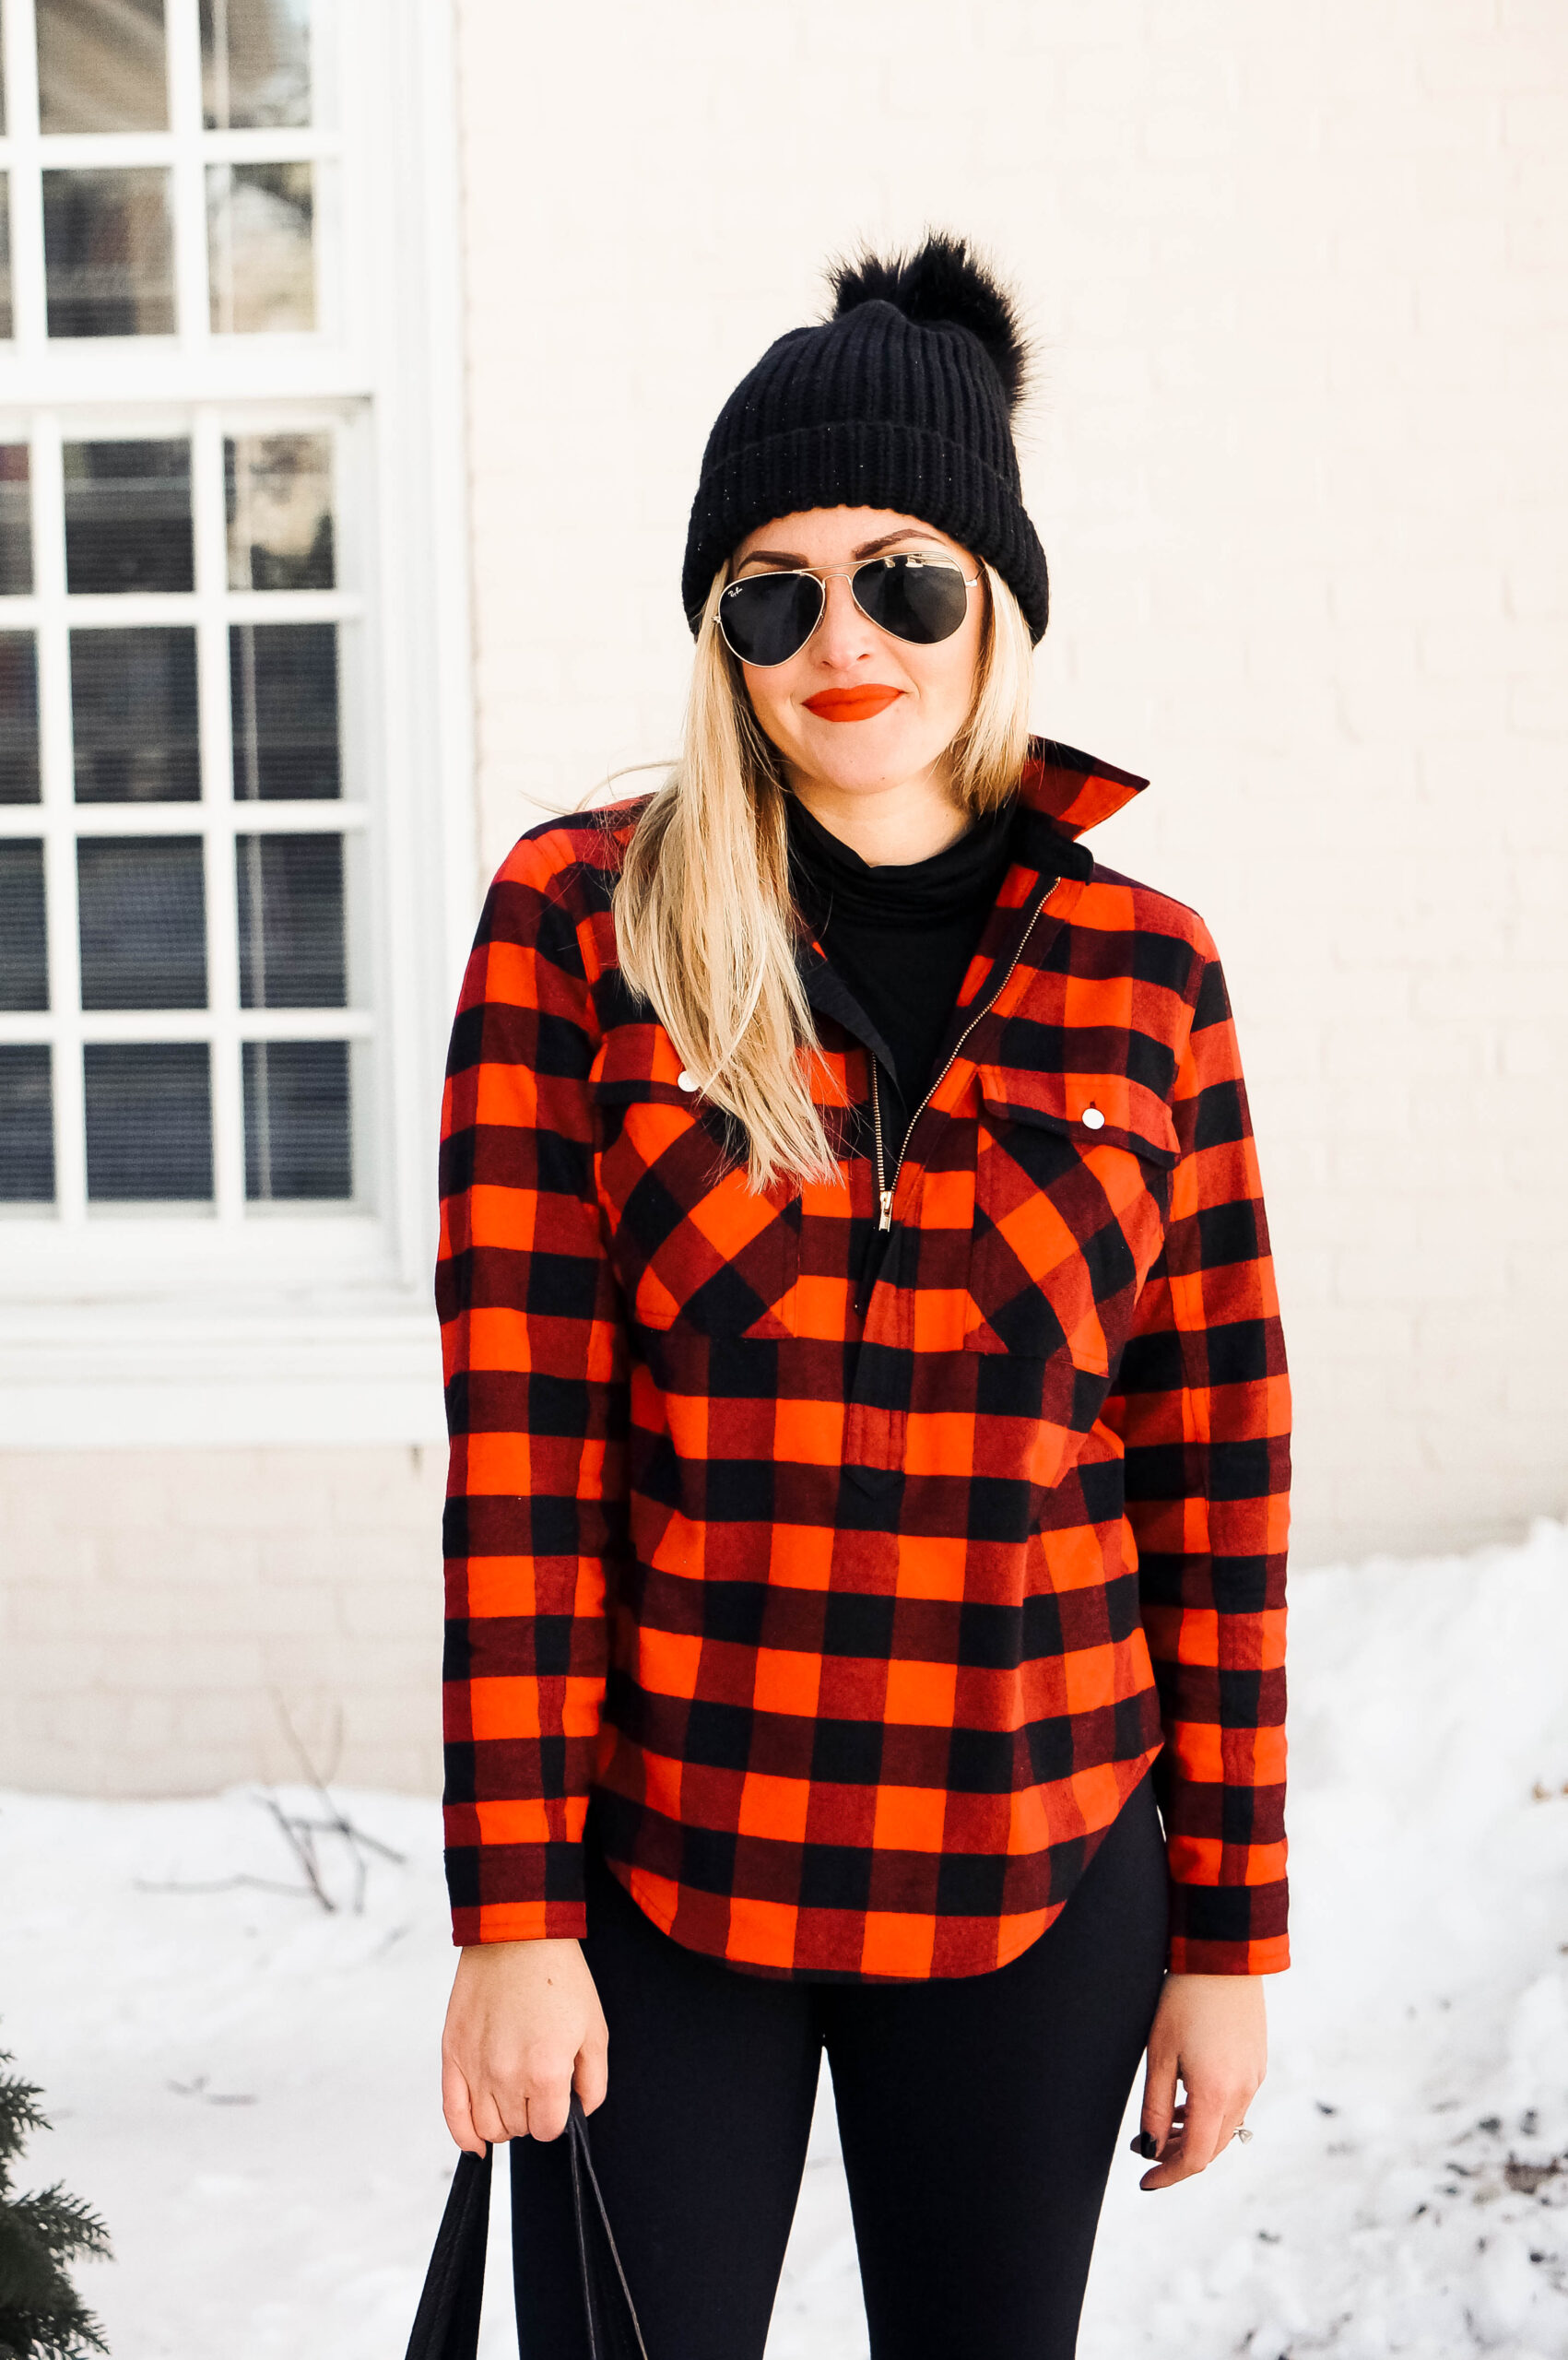 Black Leggings with Red and Navy Plaid Coat Outfits (2 ideas & outfits)